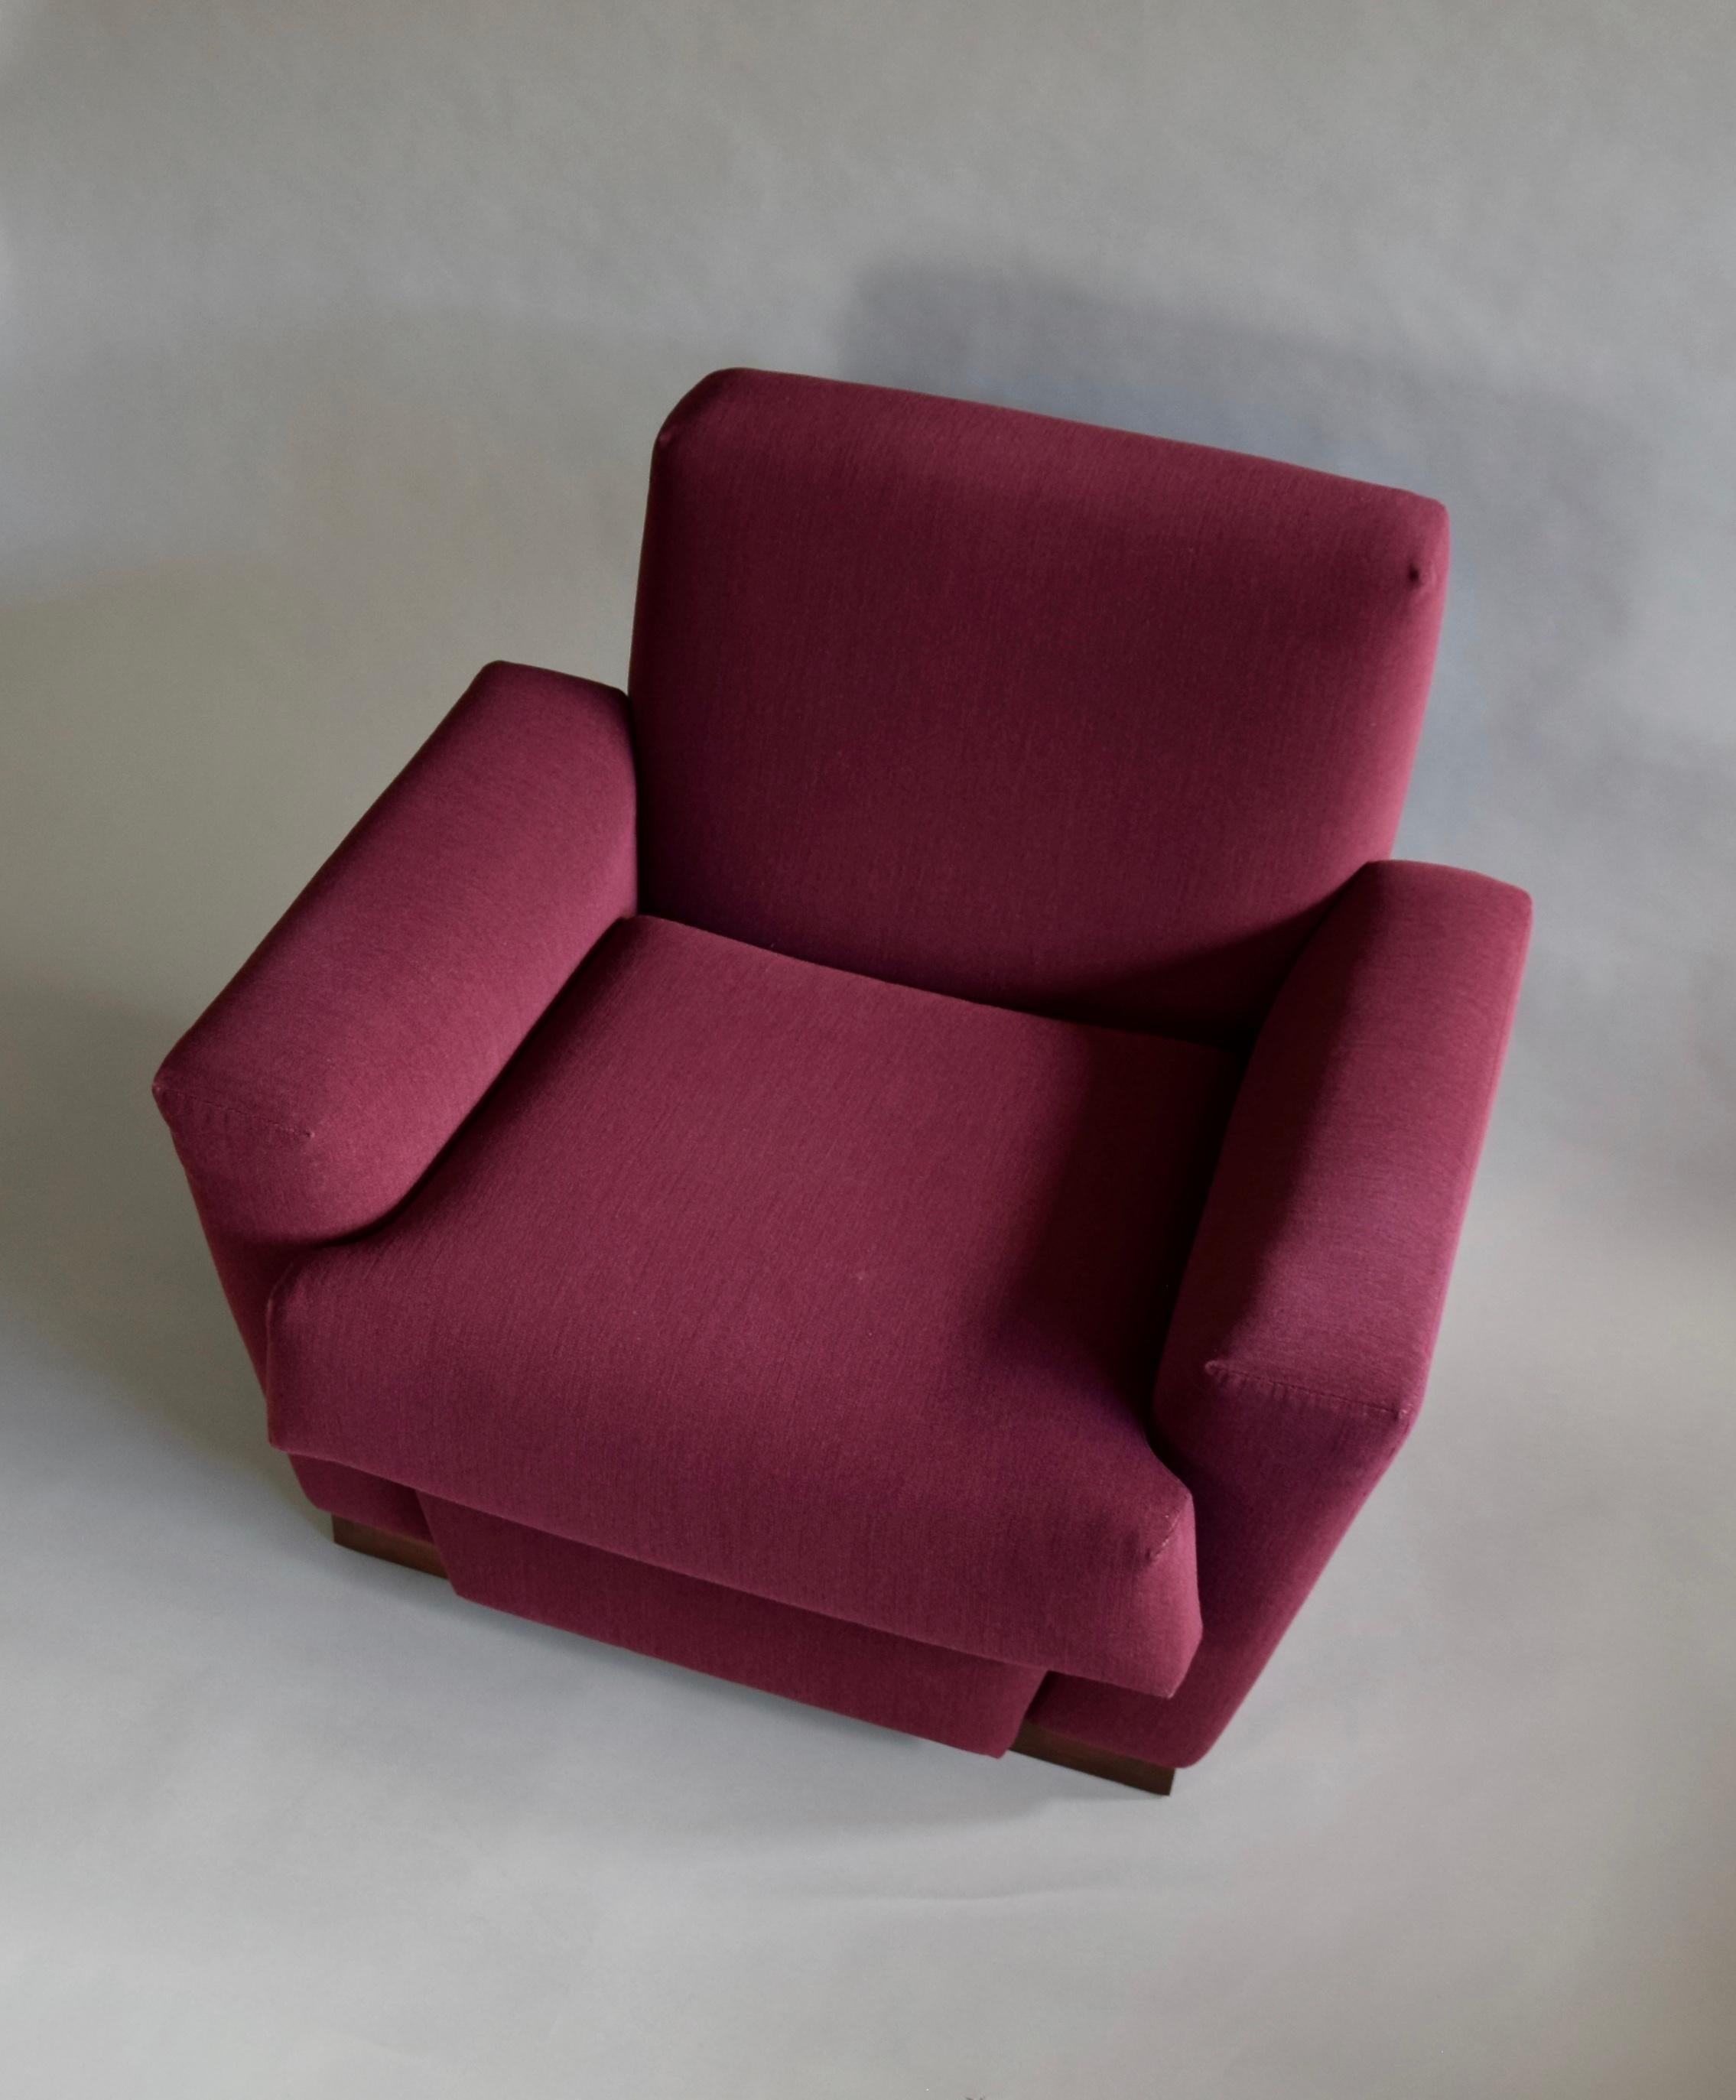 Limited edition lounge chair designed by Frank Lloyd Wright in the 1920's for the Tokyo Imperial Hotel. 

A select number of Wright furniture designs from the Imperial Hotel were put into limited production in 1996 by Cassina (owner of FLW